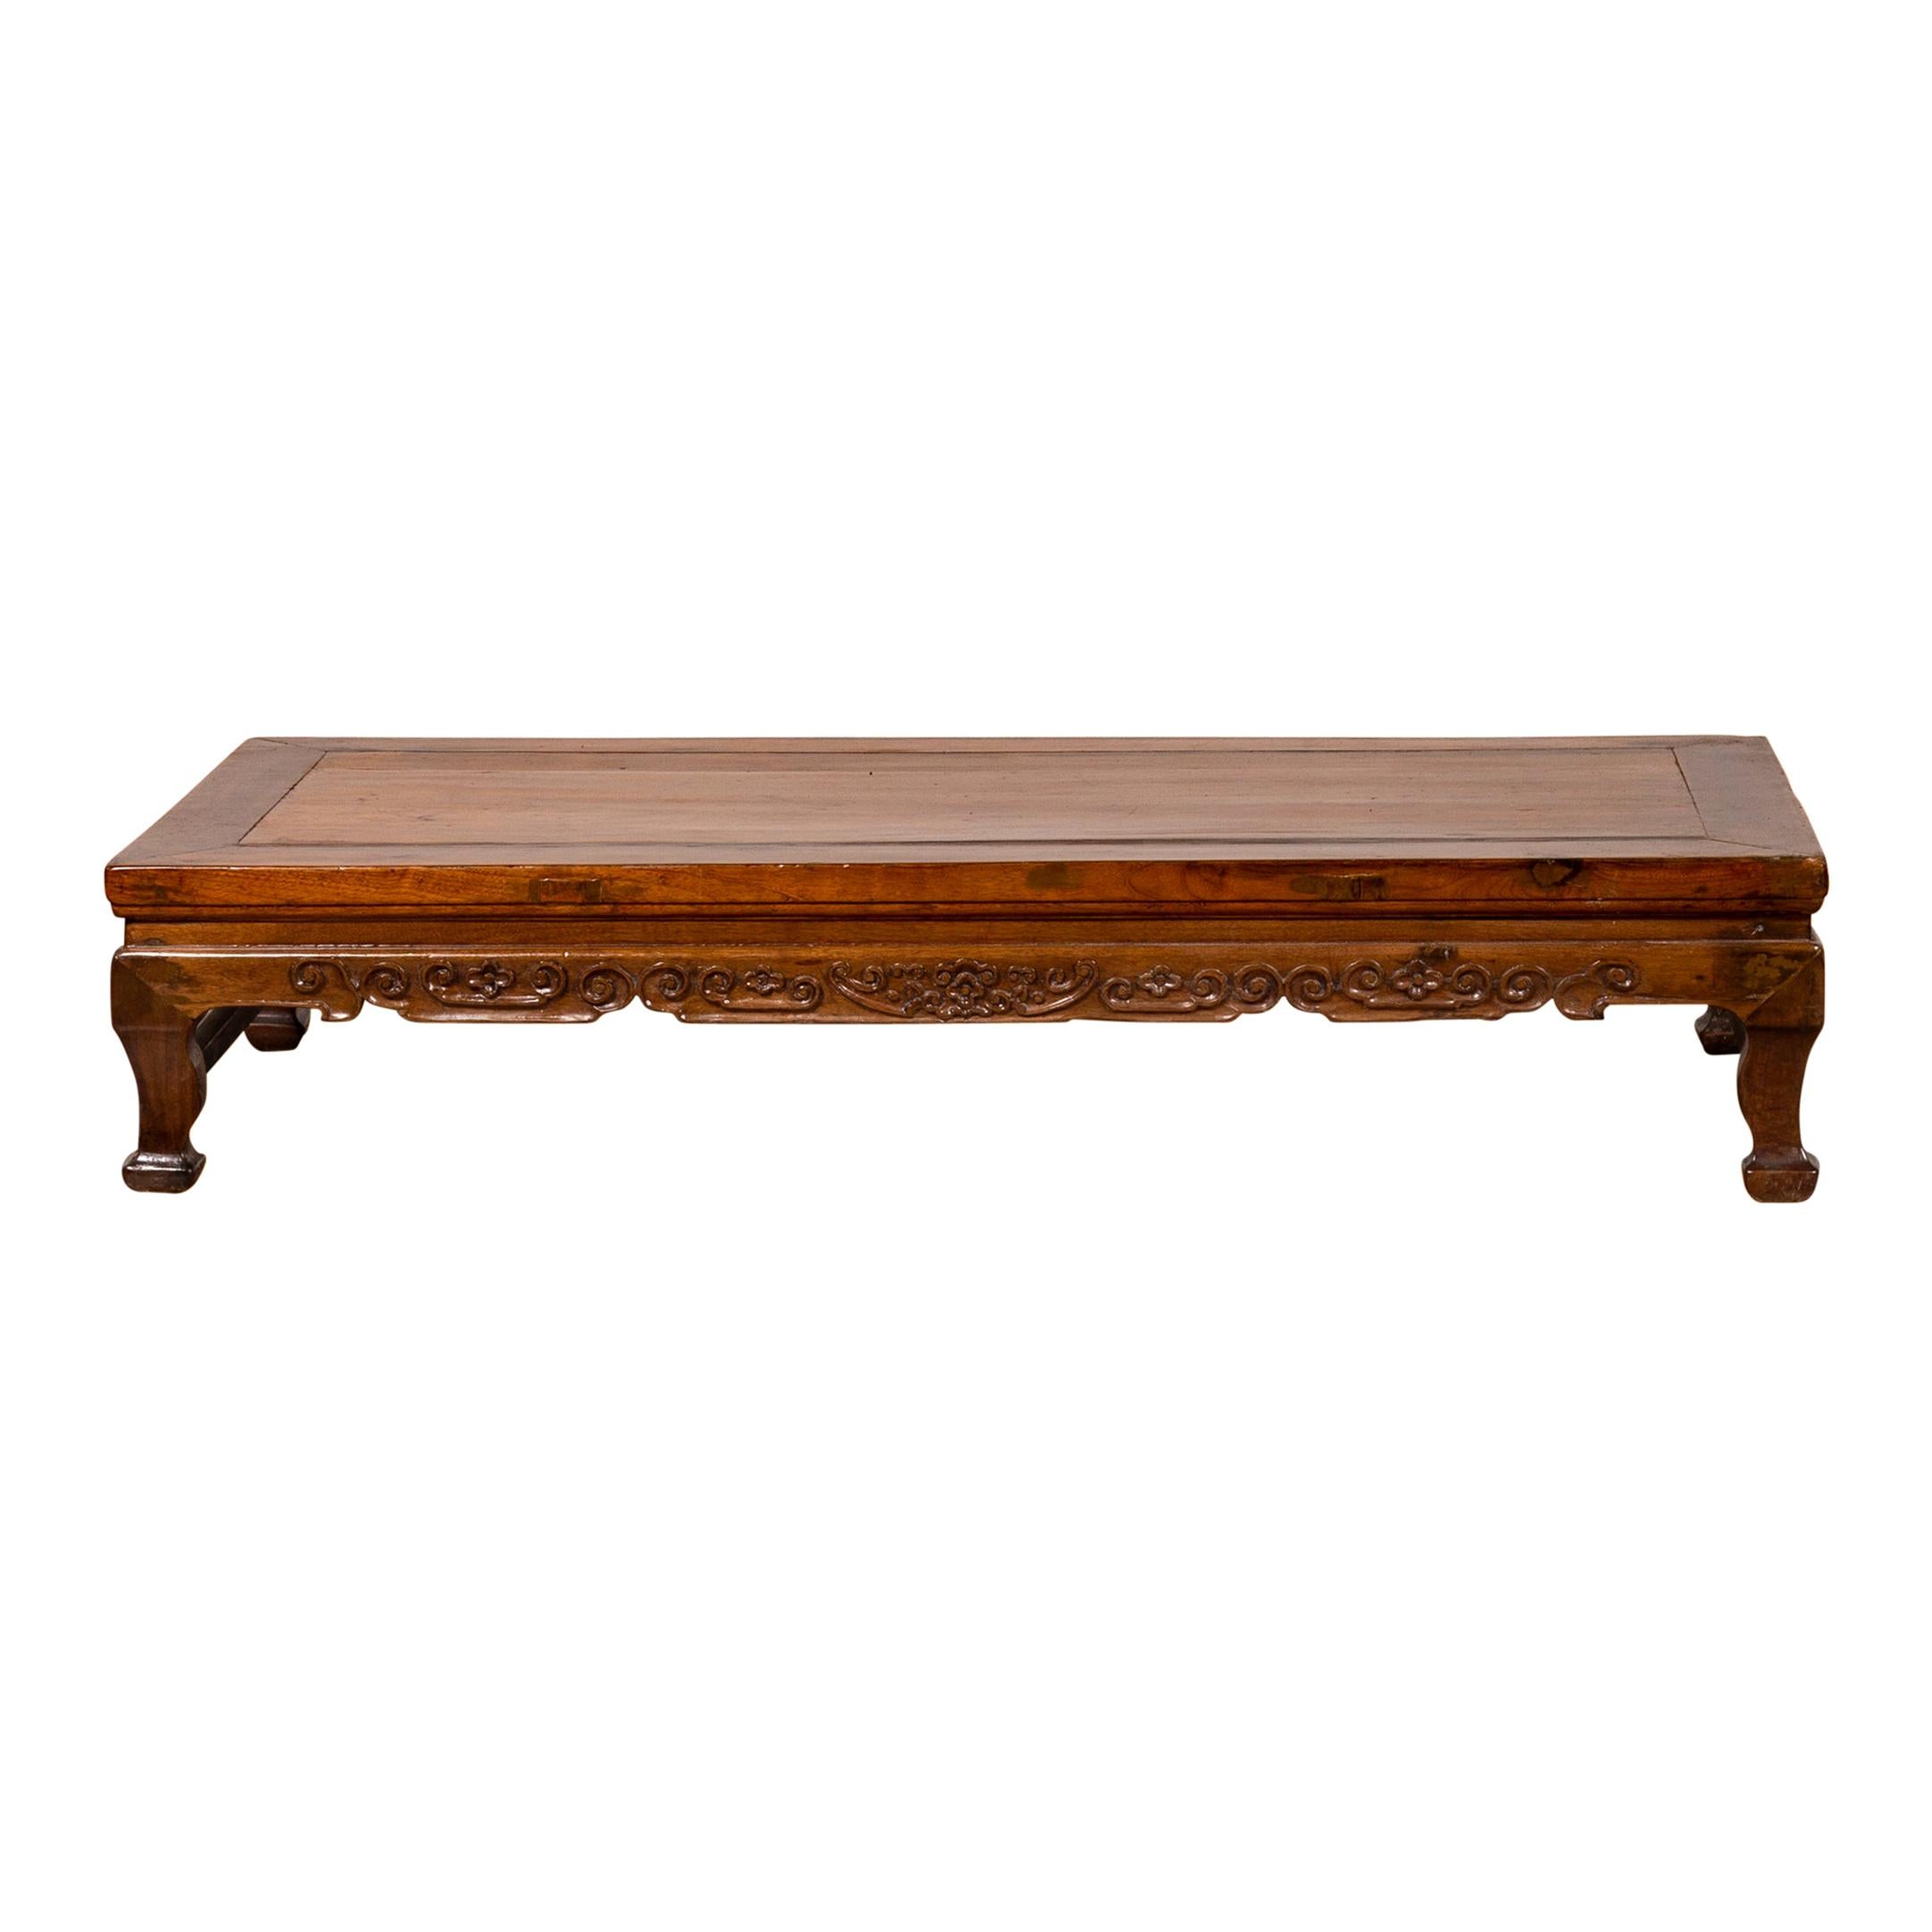 Chinese Elmwood Low Prayer Waisted Table with Carved Apron and Curving Feet